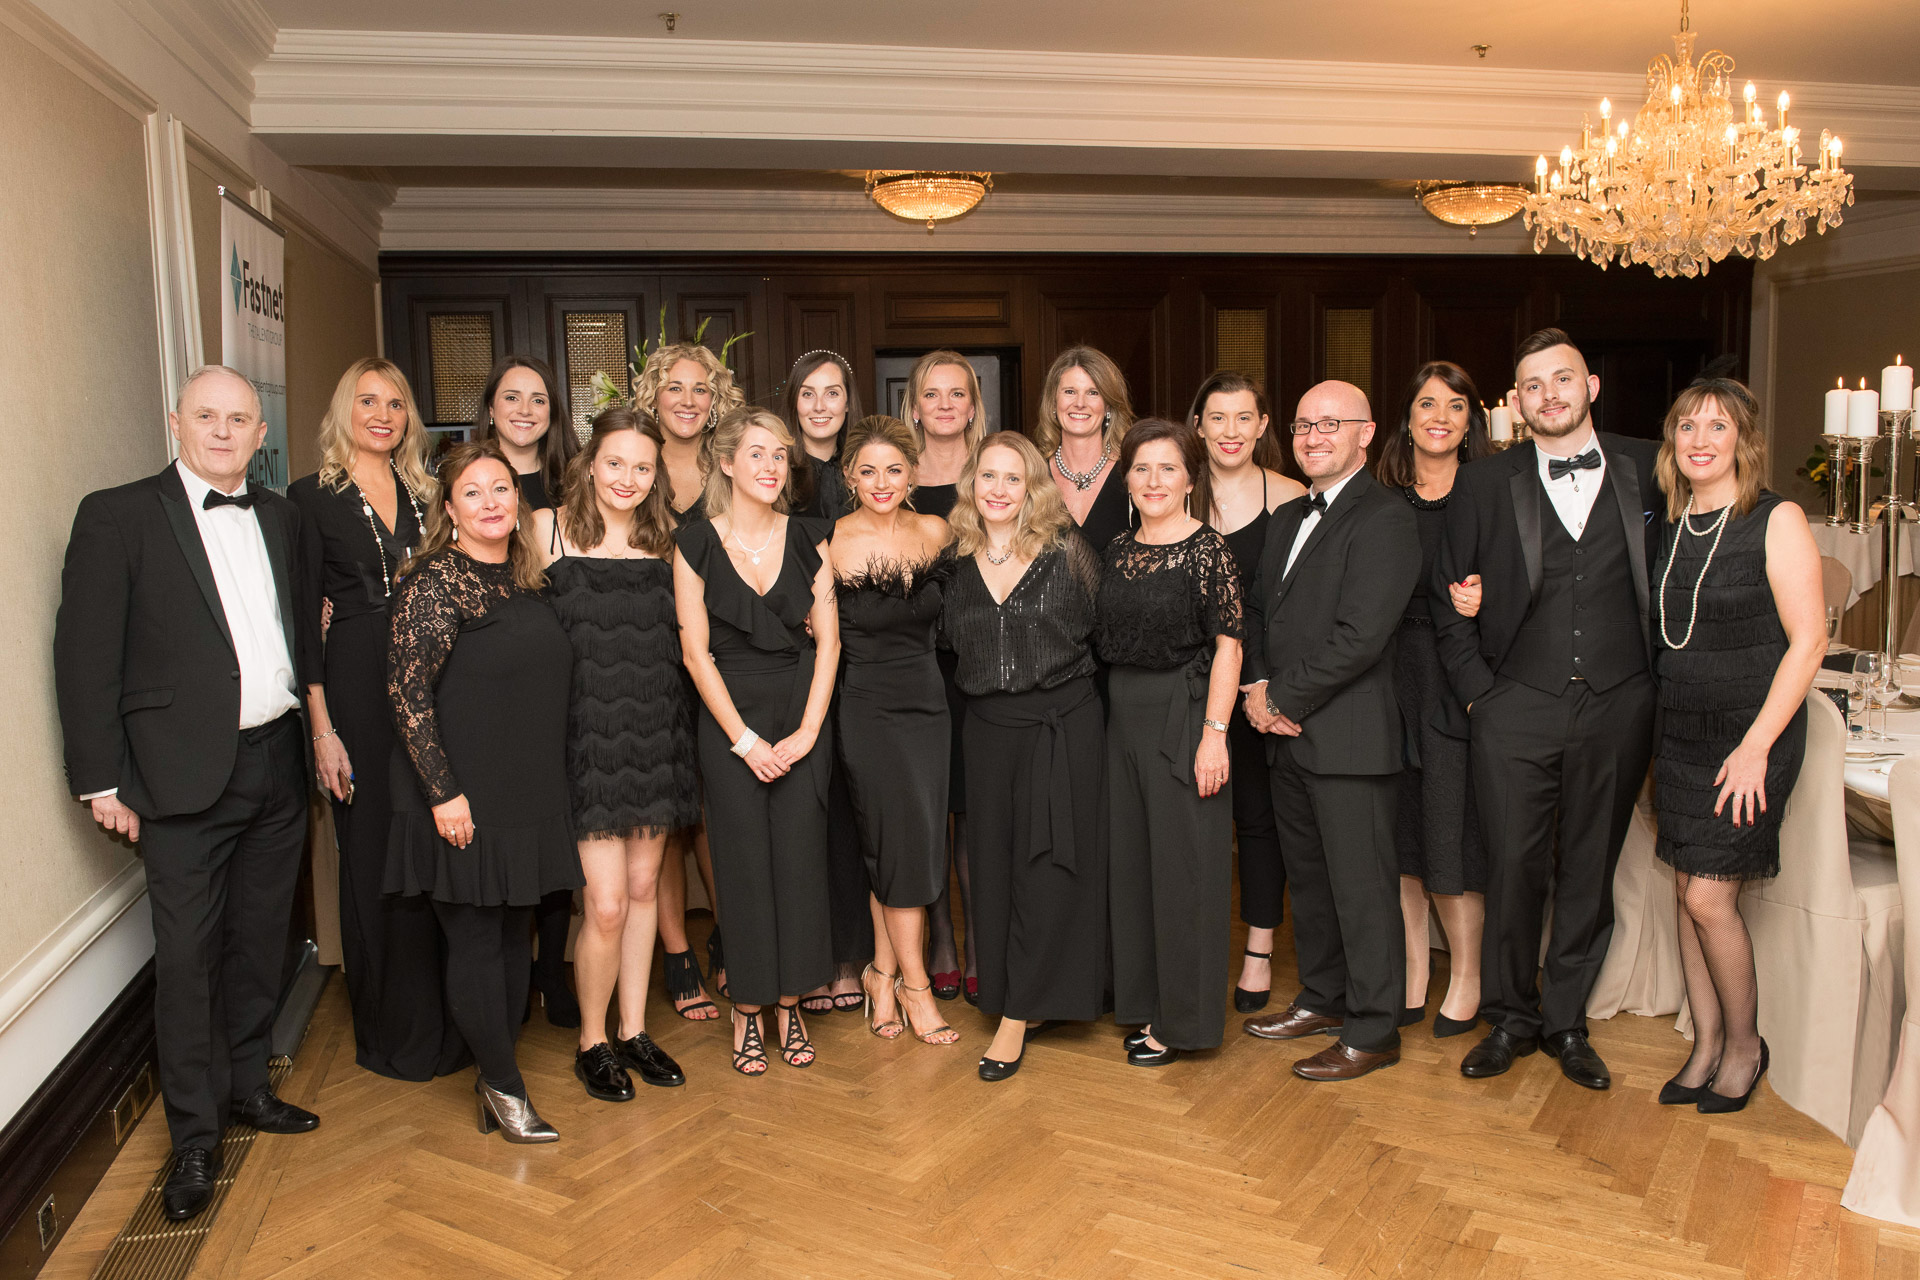 Fastnet- The Talent Group celebrating 20 years of success